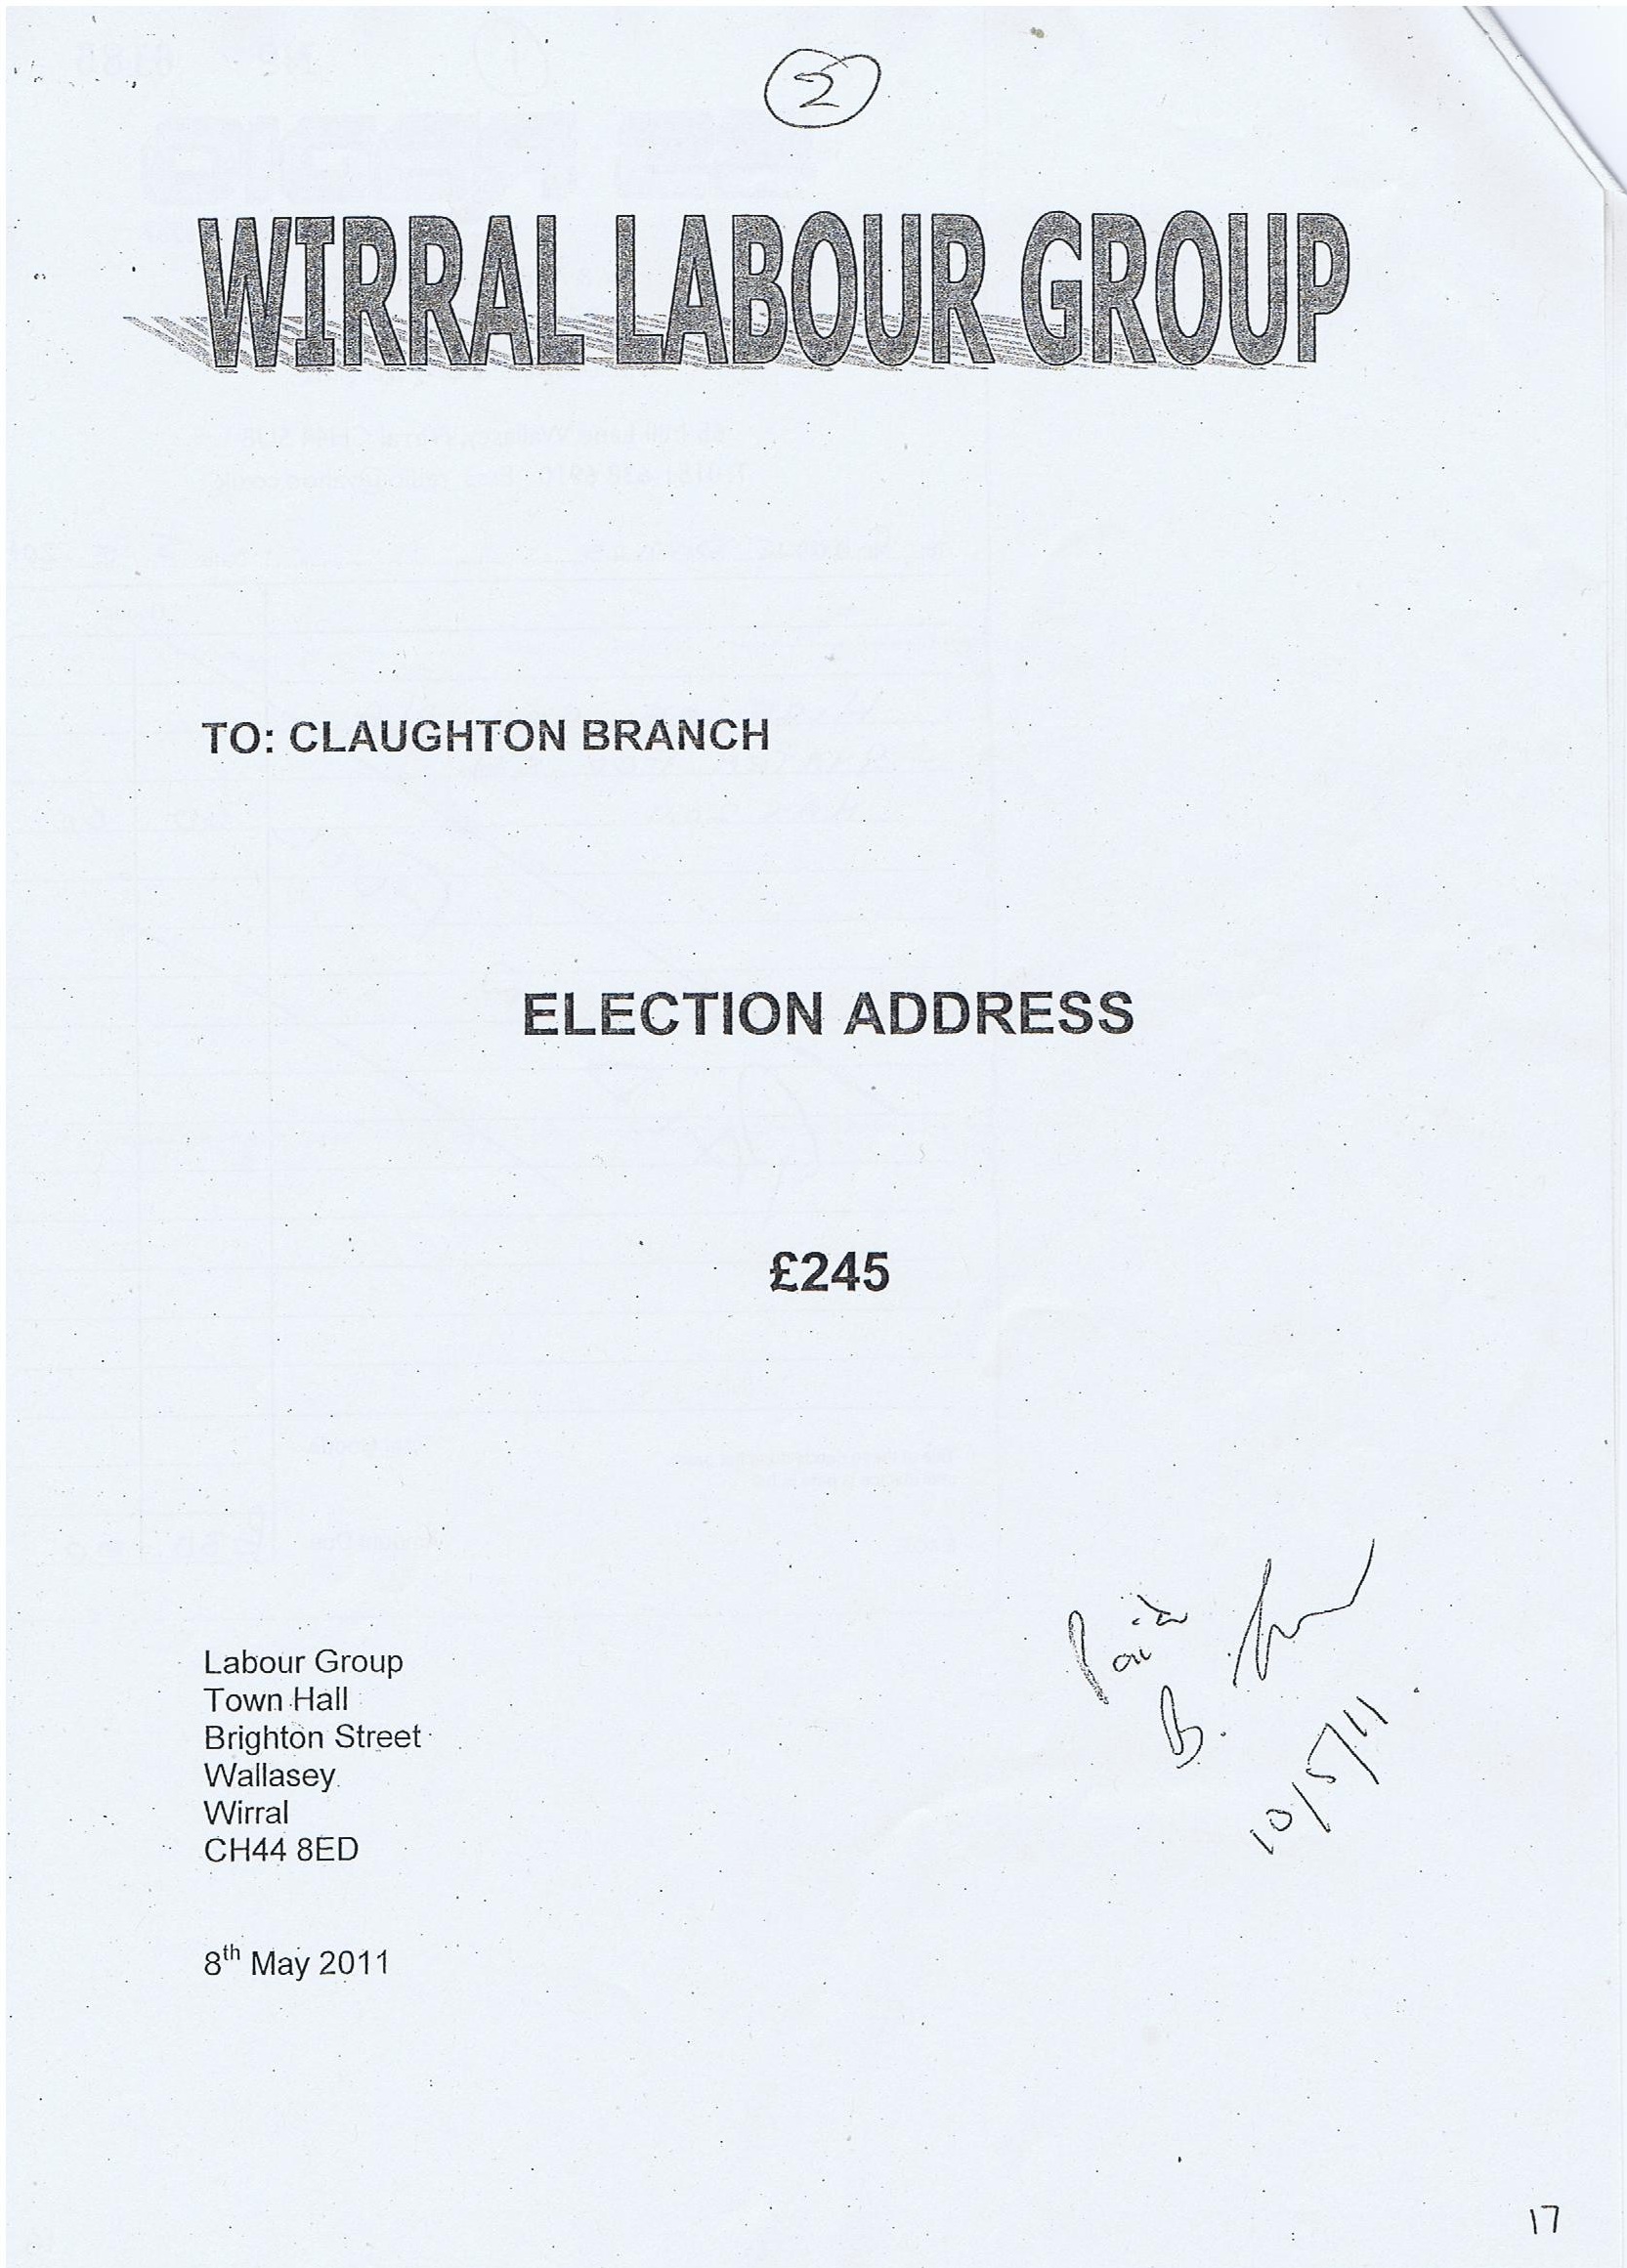 Election Expense Invoice Steve Foulkes Wirral Council election (Claughton ward) 2011 Labour Group Election Address £245